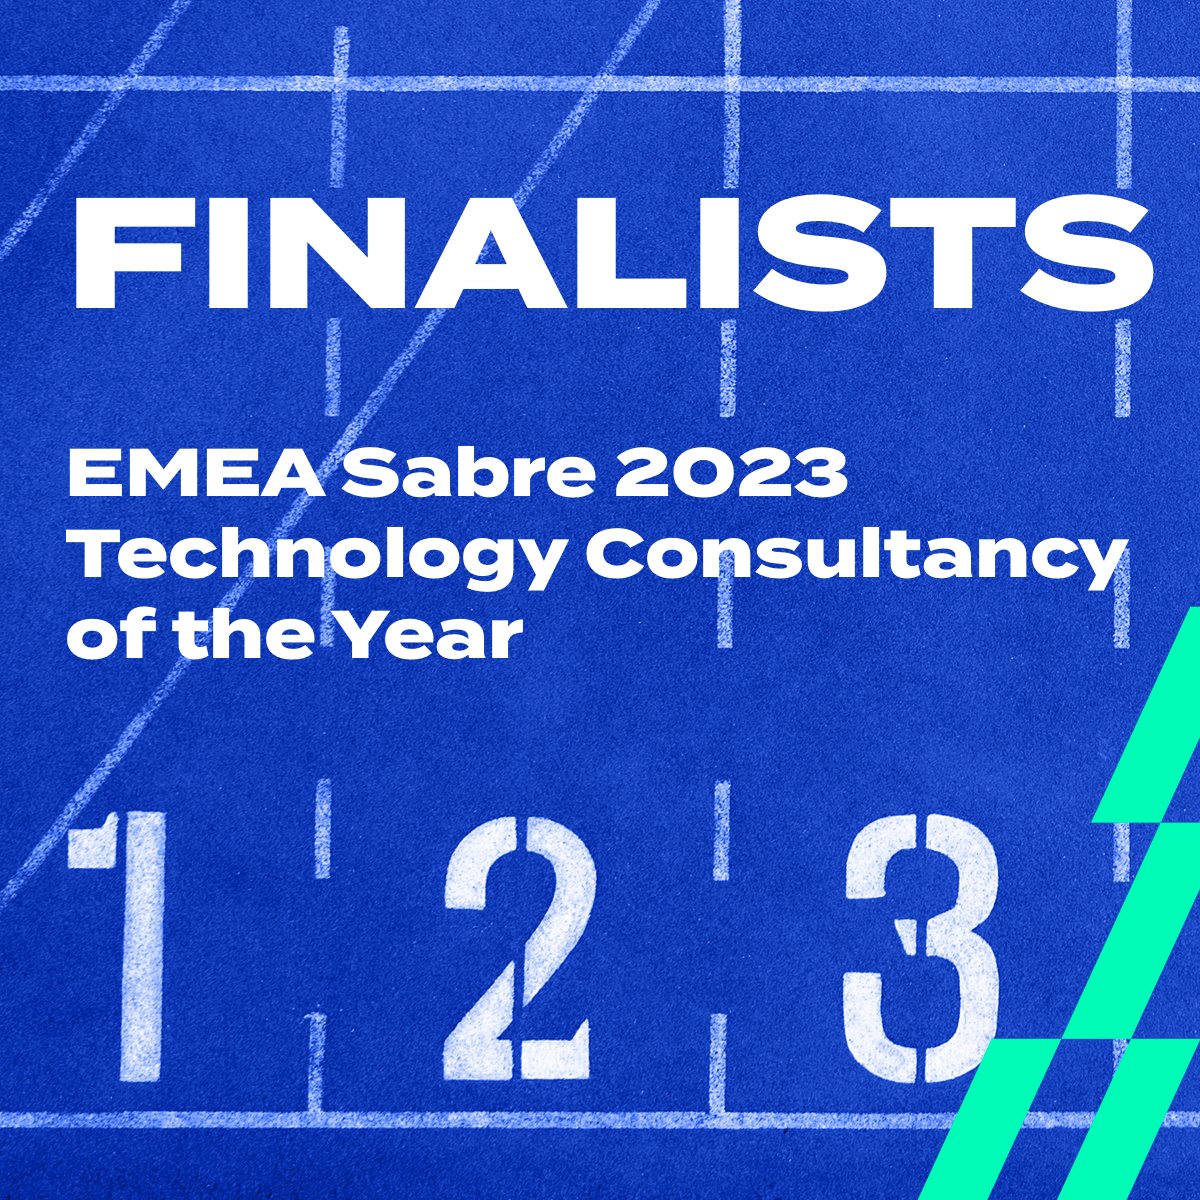 What's better than 10? 11...  We are delighted to have been shortlisted as finalists for @Provoke Media's Technology Consultancy of the Year at this year's #EMEASabre Awards - hot on the heels of the 10 client campaigns nominated earlier this month. See you in Frankfurt!